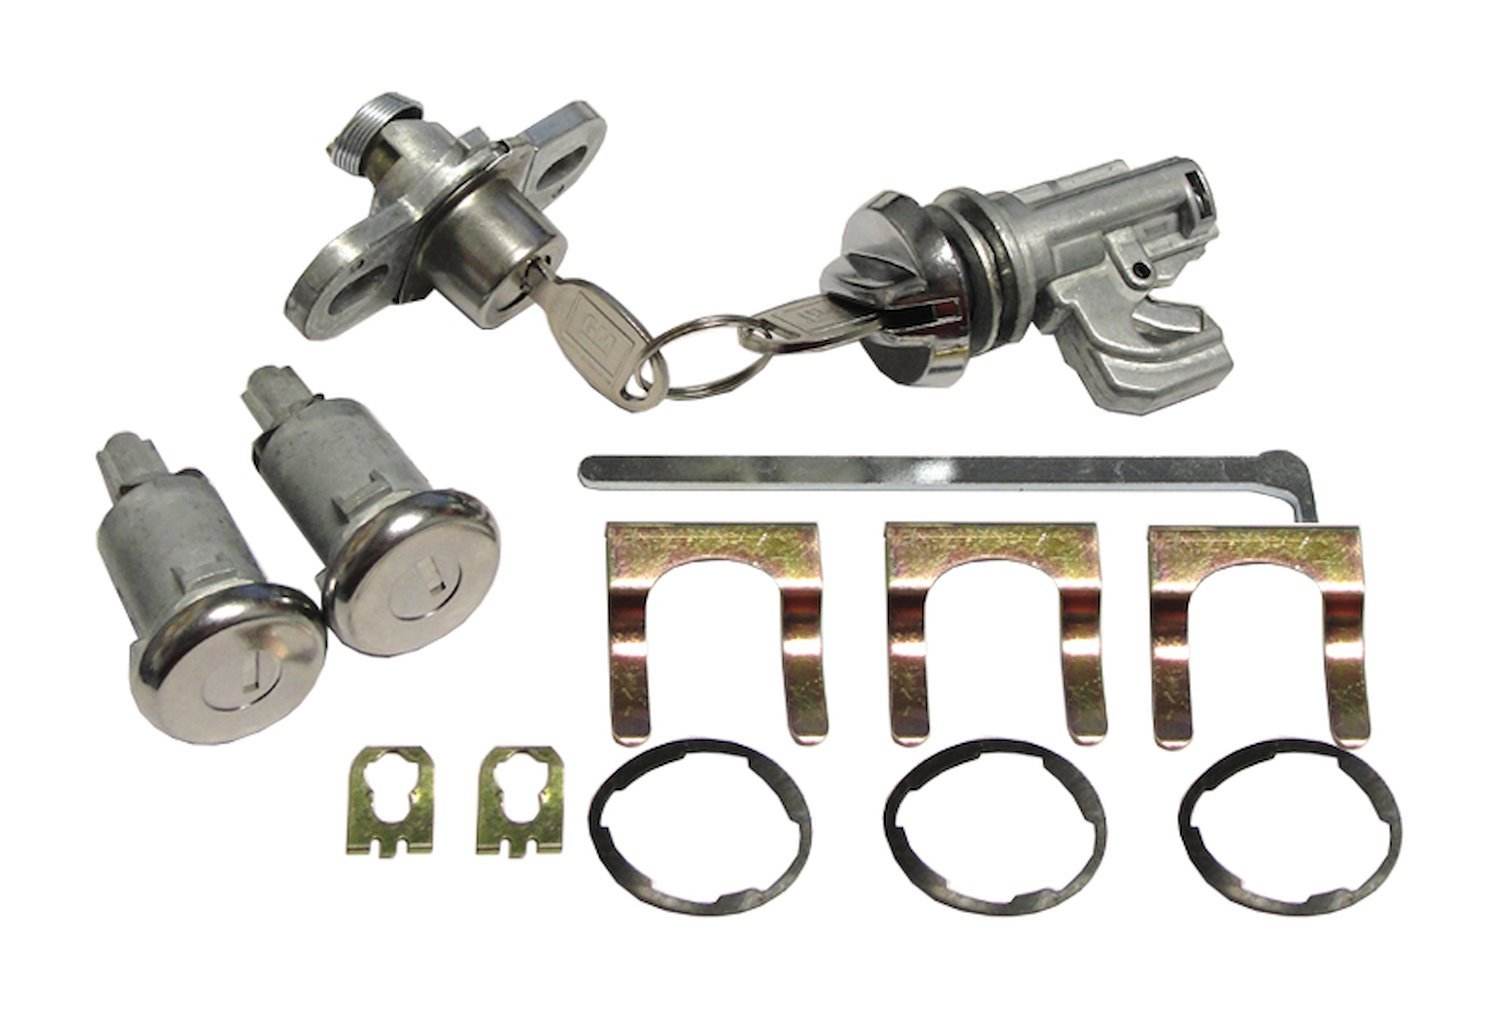 Door, Trunk & Glovebox Lock Set for 1974-1977 Chevrolet Camaro With Long Shaft Cylinders [Oval Style GM Keys]